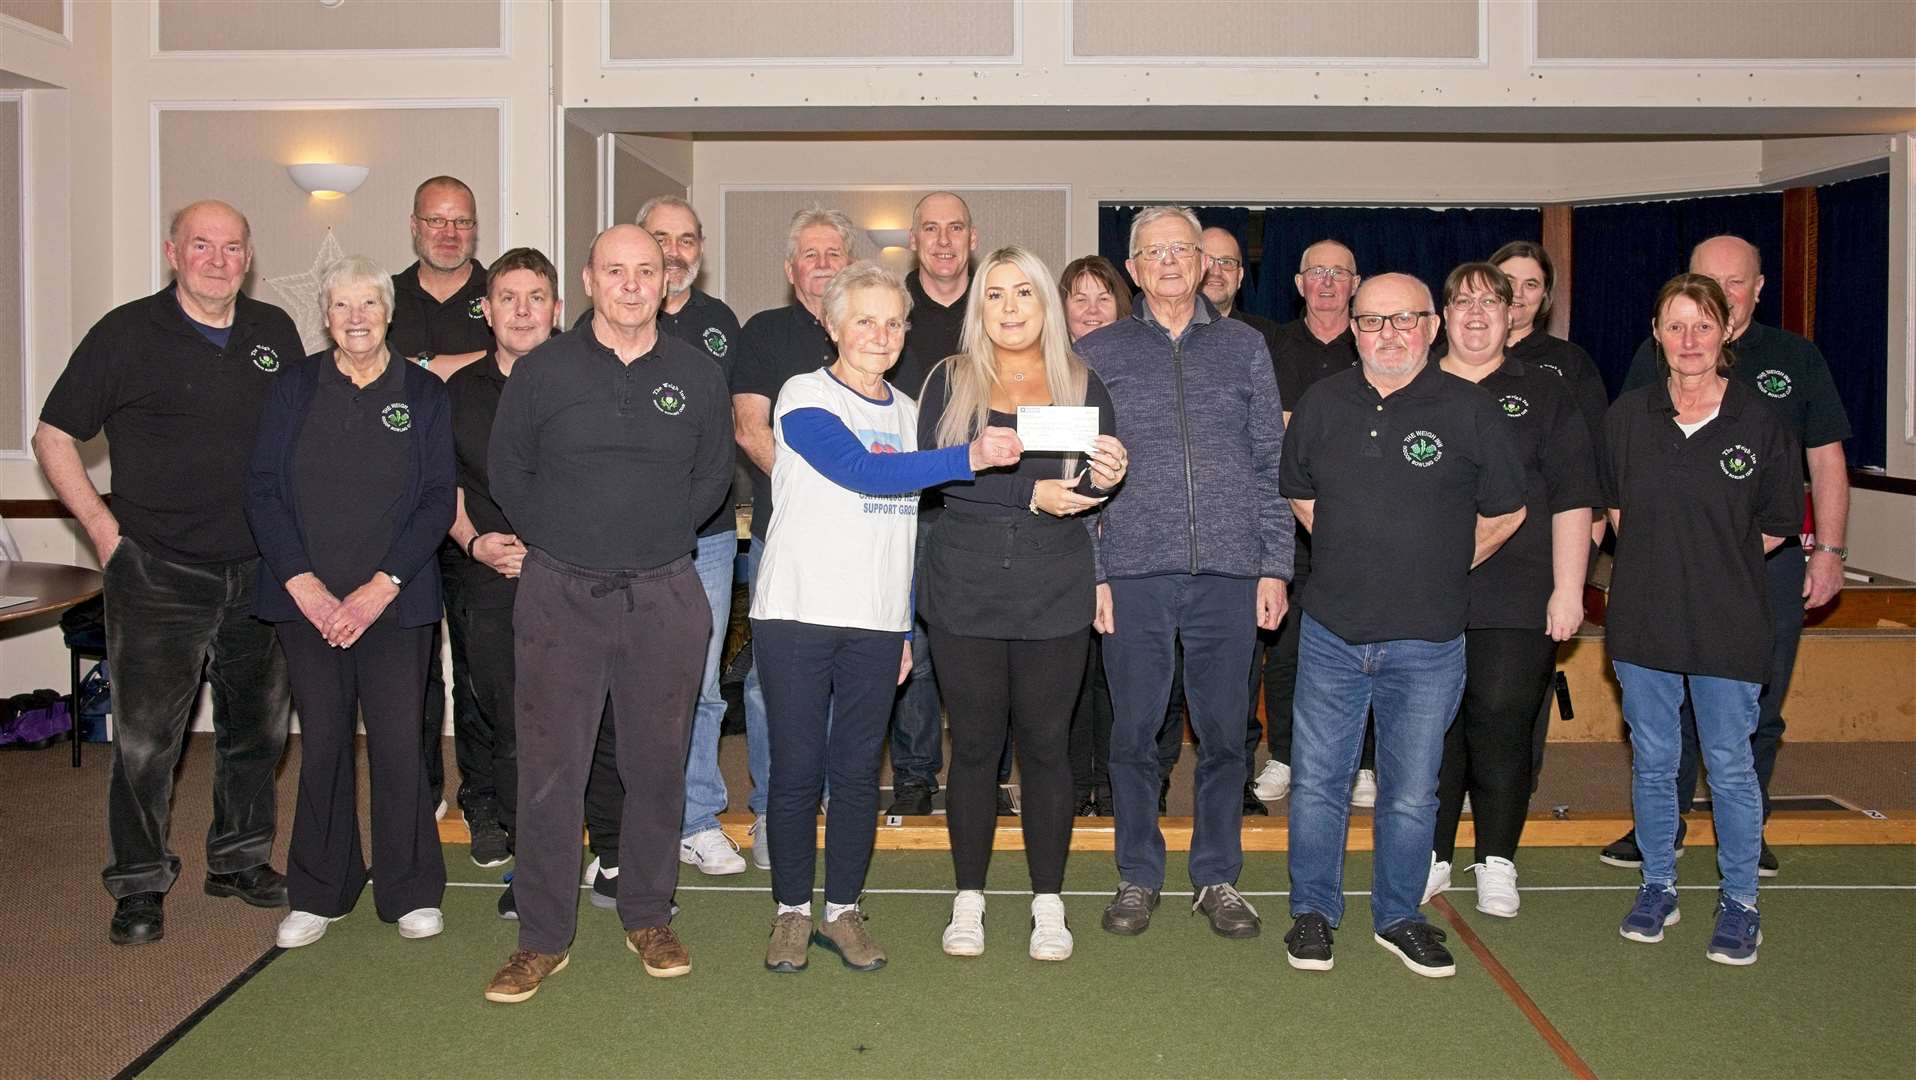 The Weigh Inn indoor bowling club presented a cheque to the Caithness Heart Support Group.